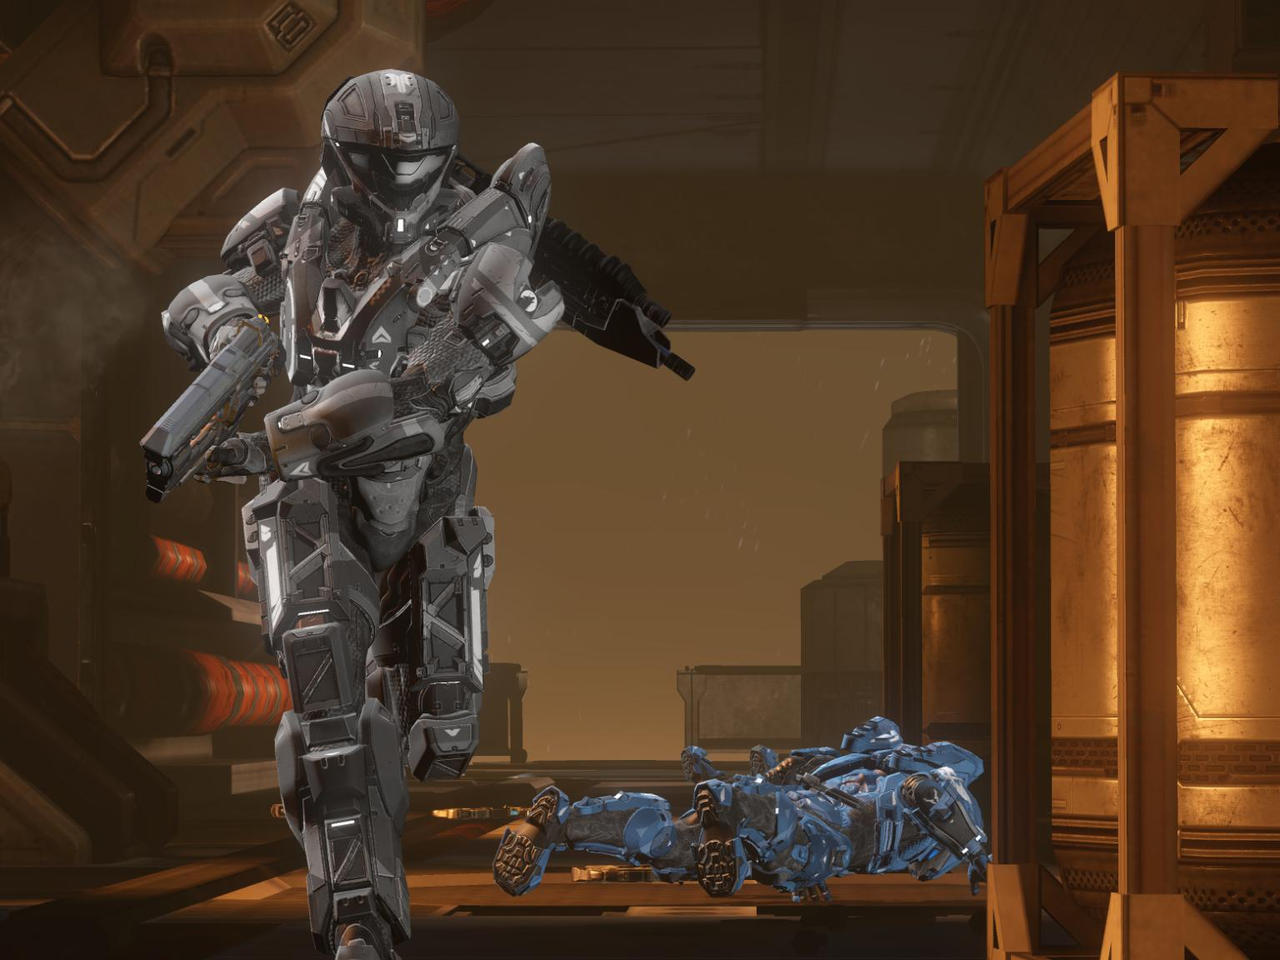 Halo 4: I will be getting my Revenge